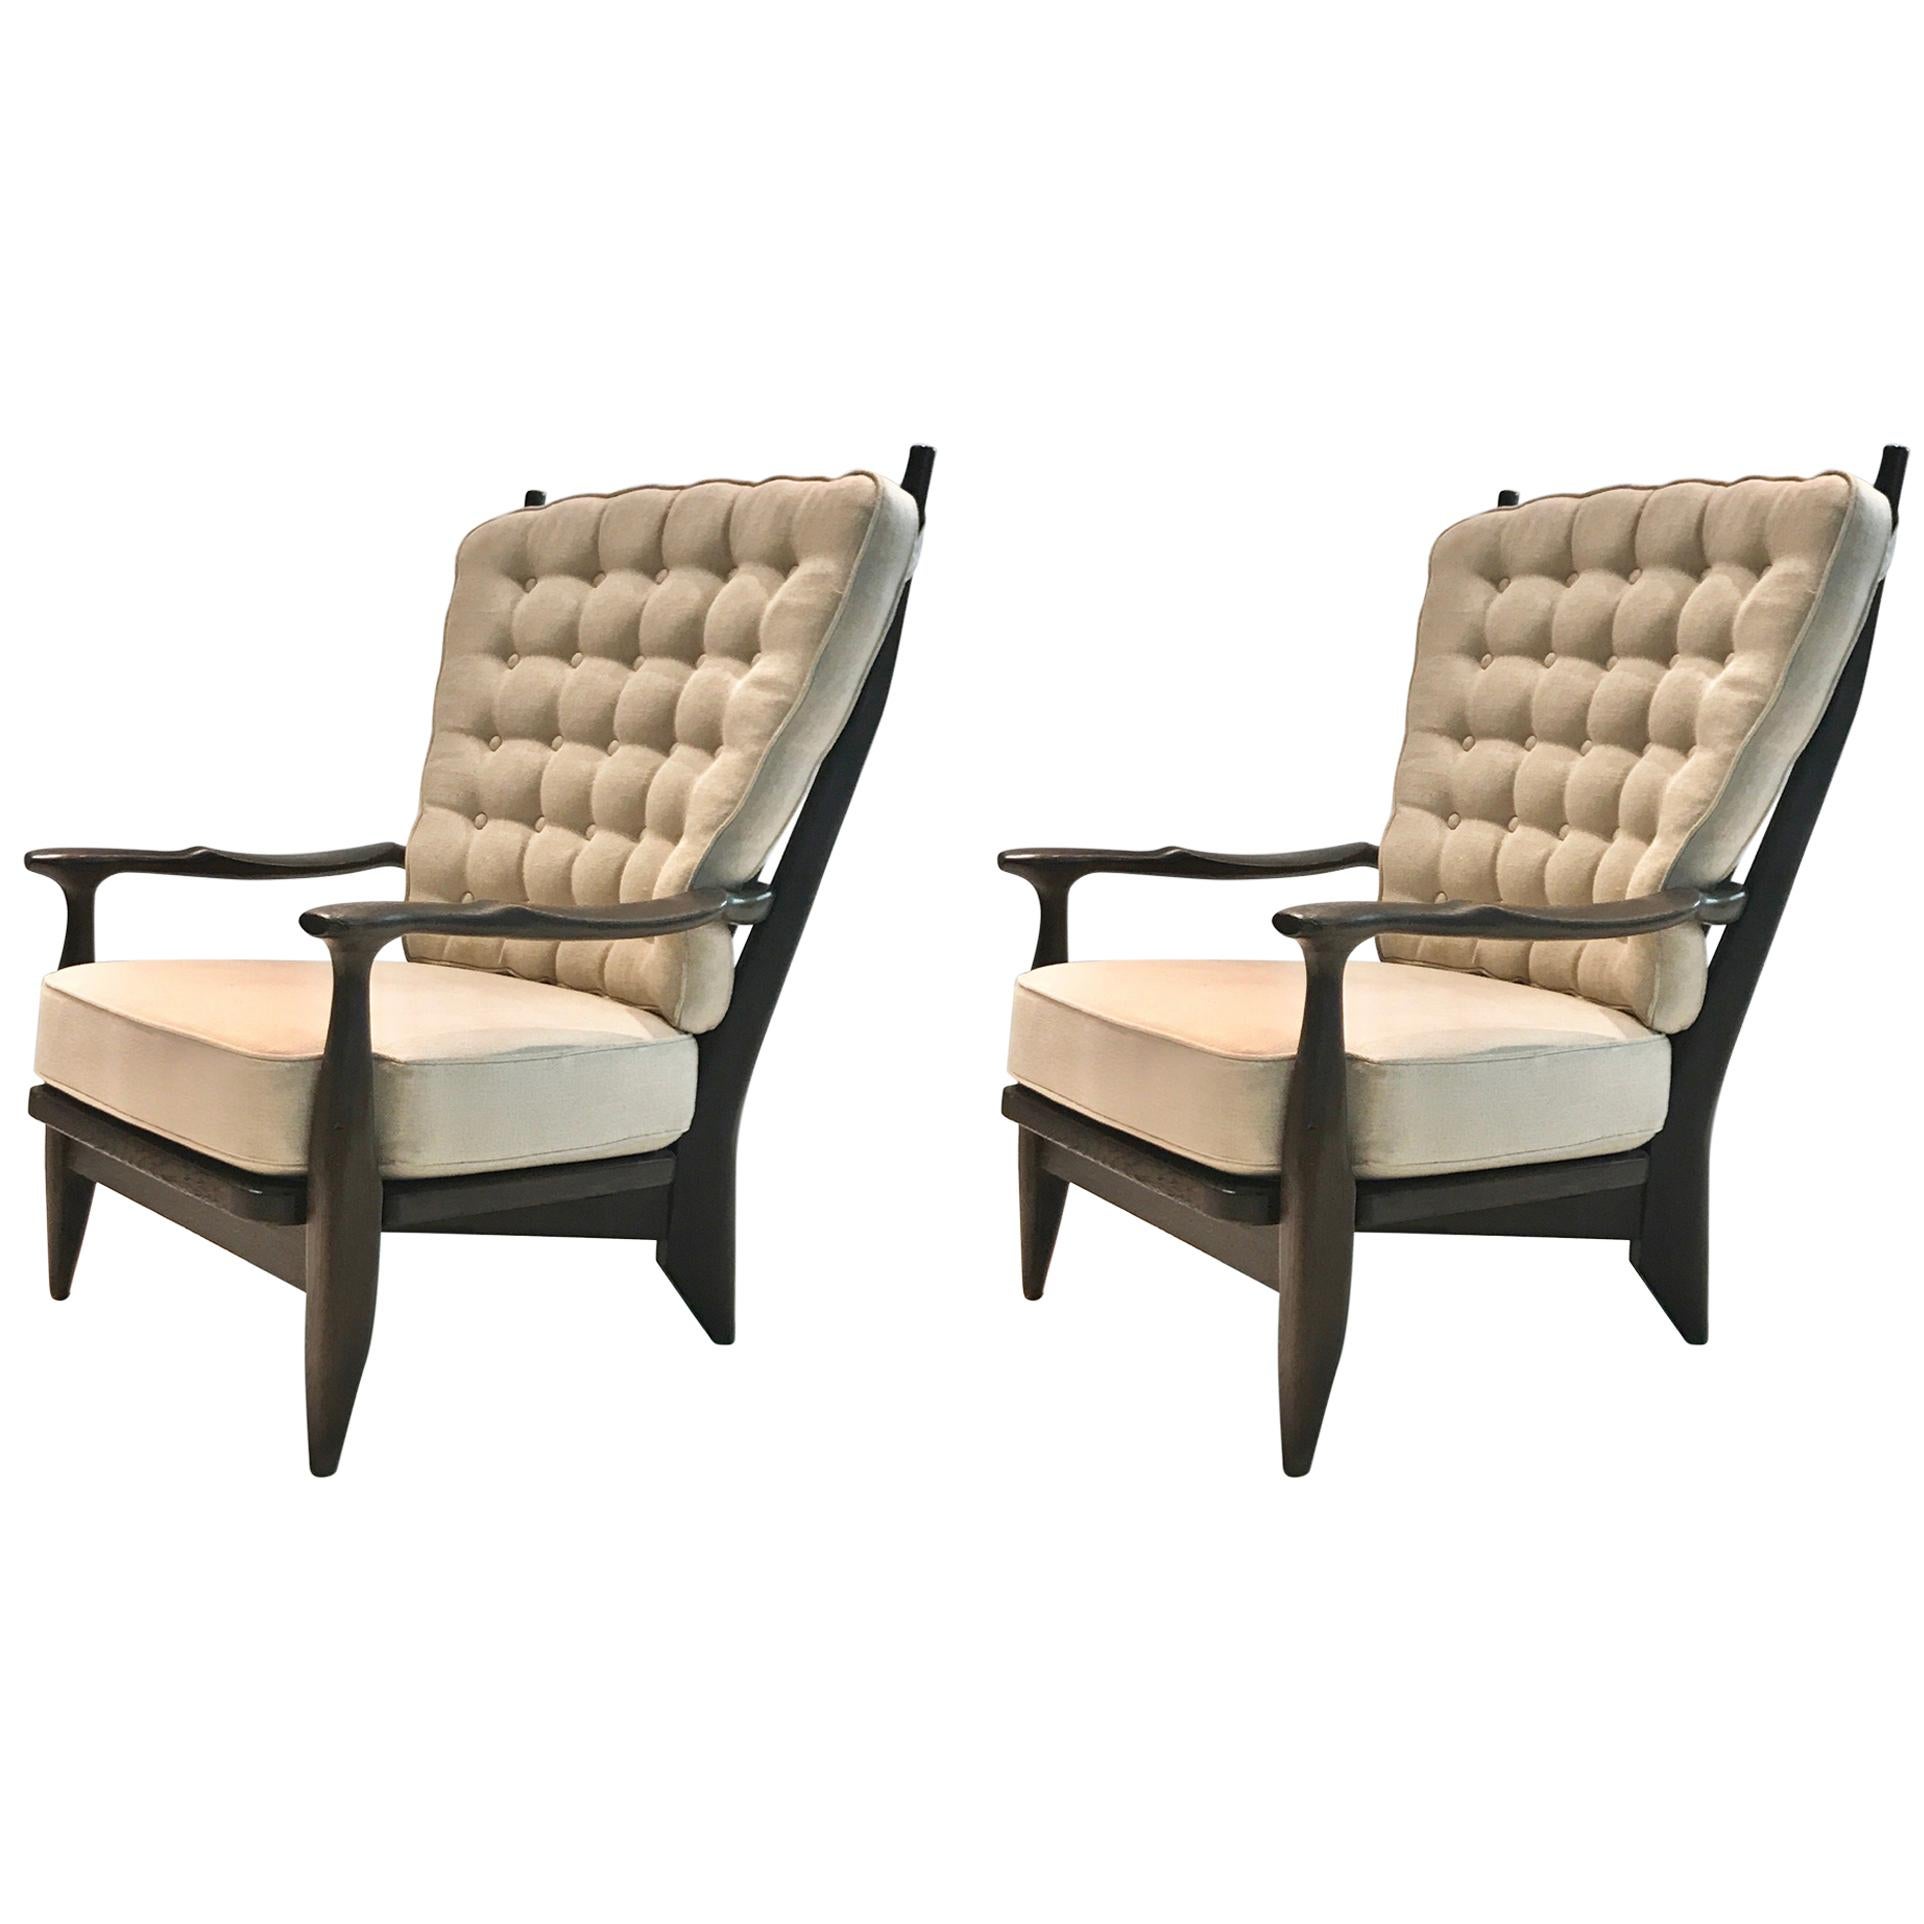 Pair of Oak and Linen Armchairs by Guillerme et Chambron, France, circa 1955